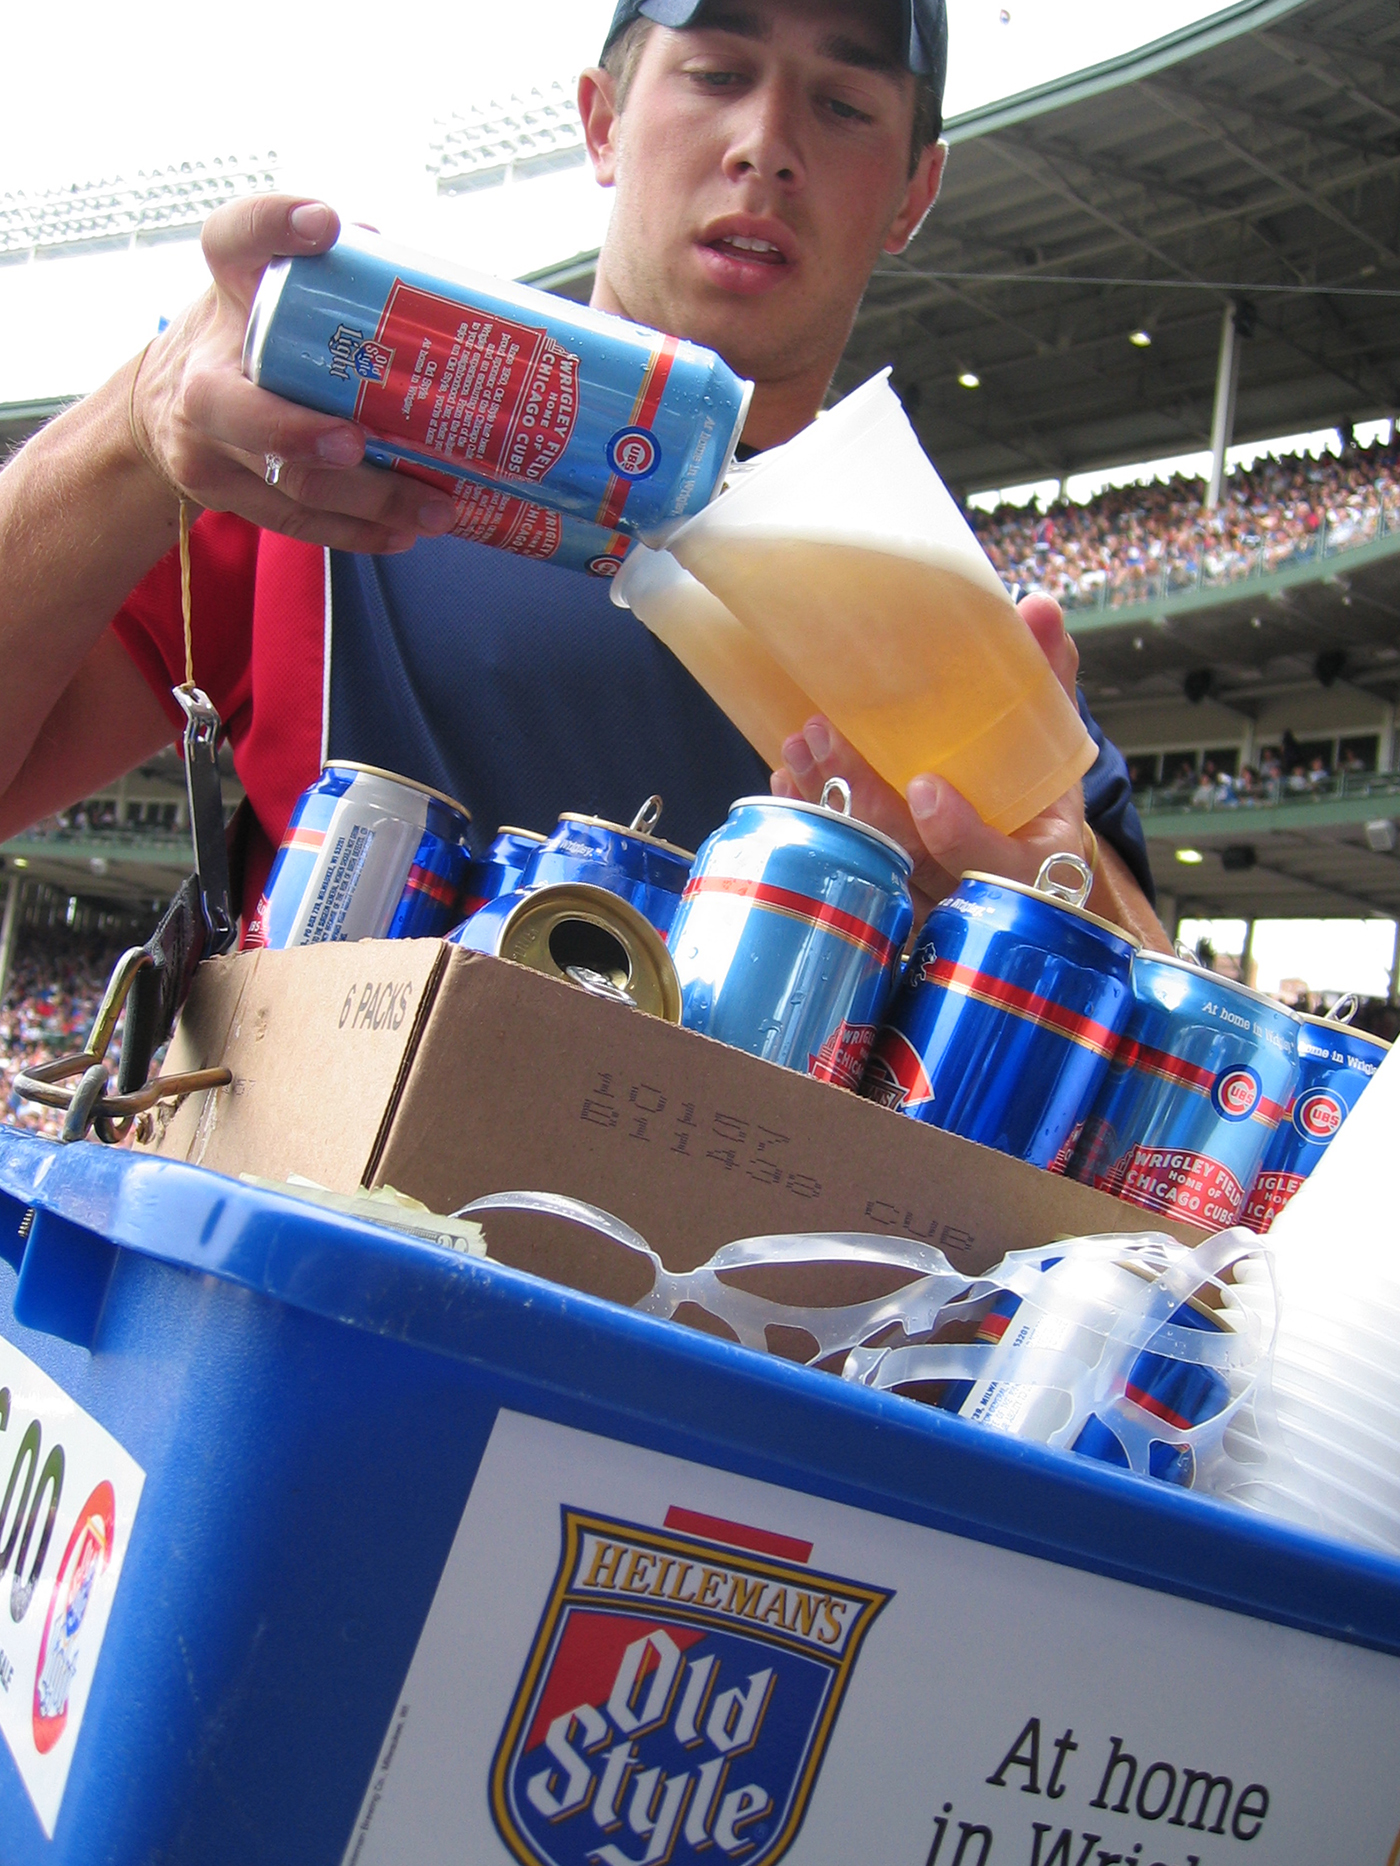 Old Style, the official beer of the Cubs | Photo: via Morguefile under the Morguefile License